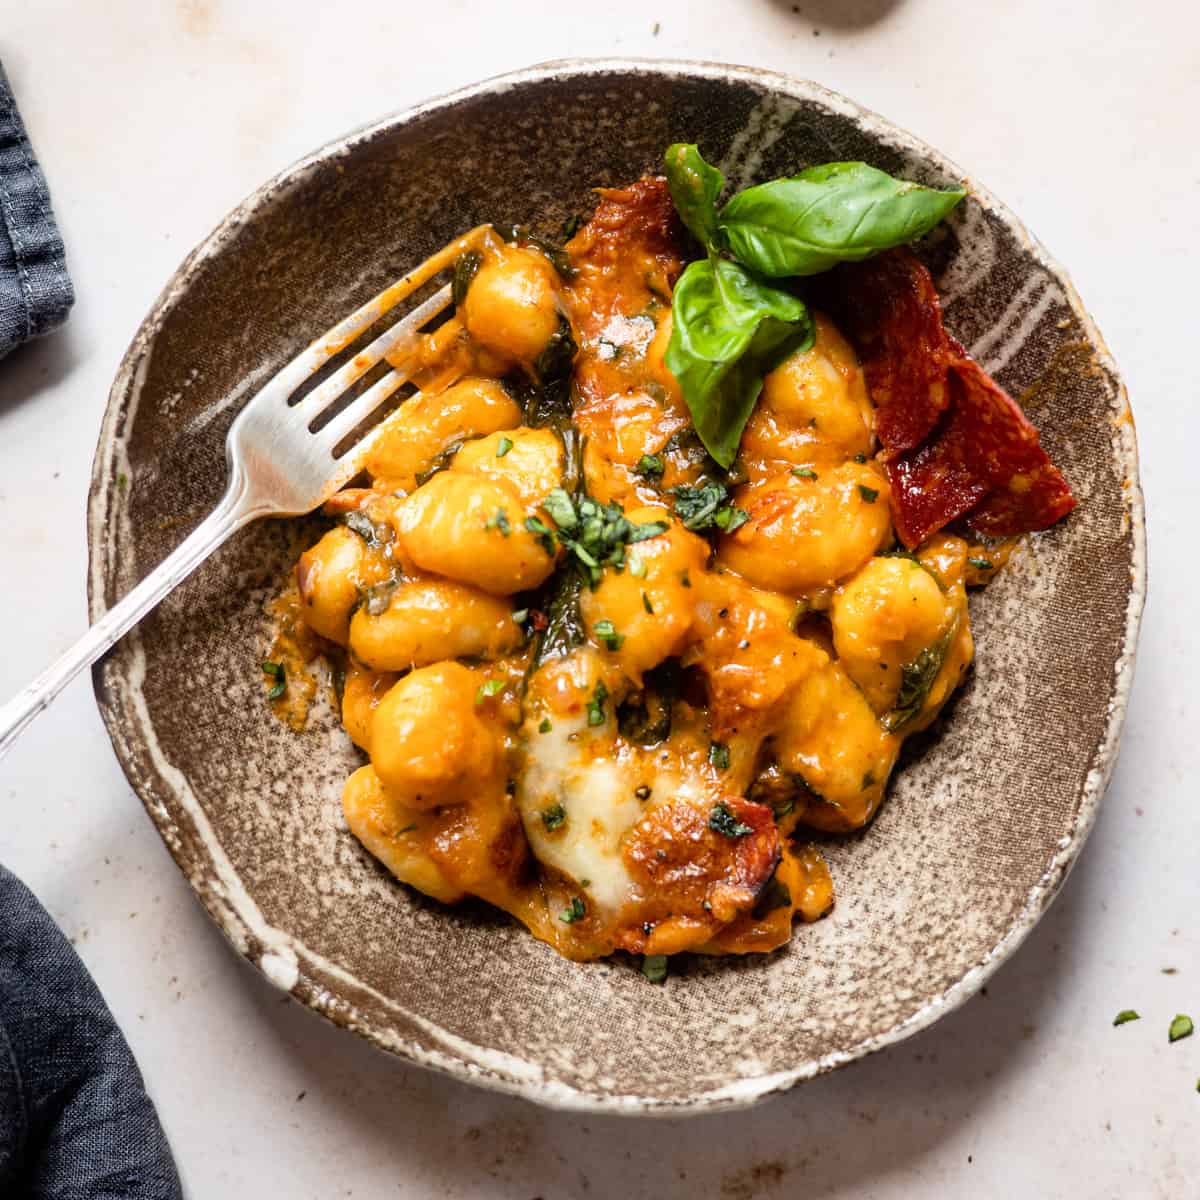 Aldi gnocchi with tomato sauce in a bowl with a fork